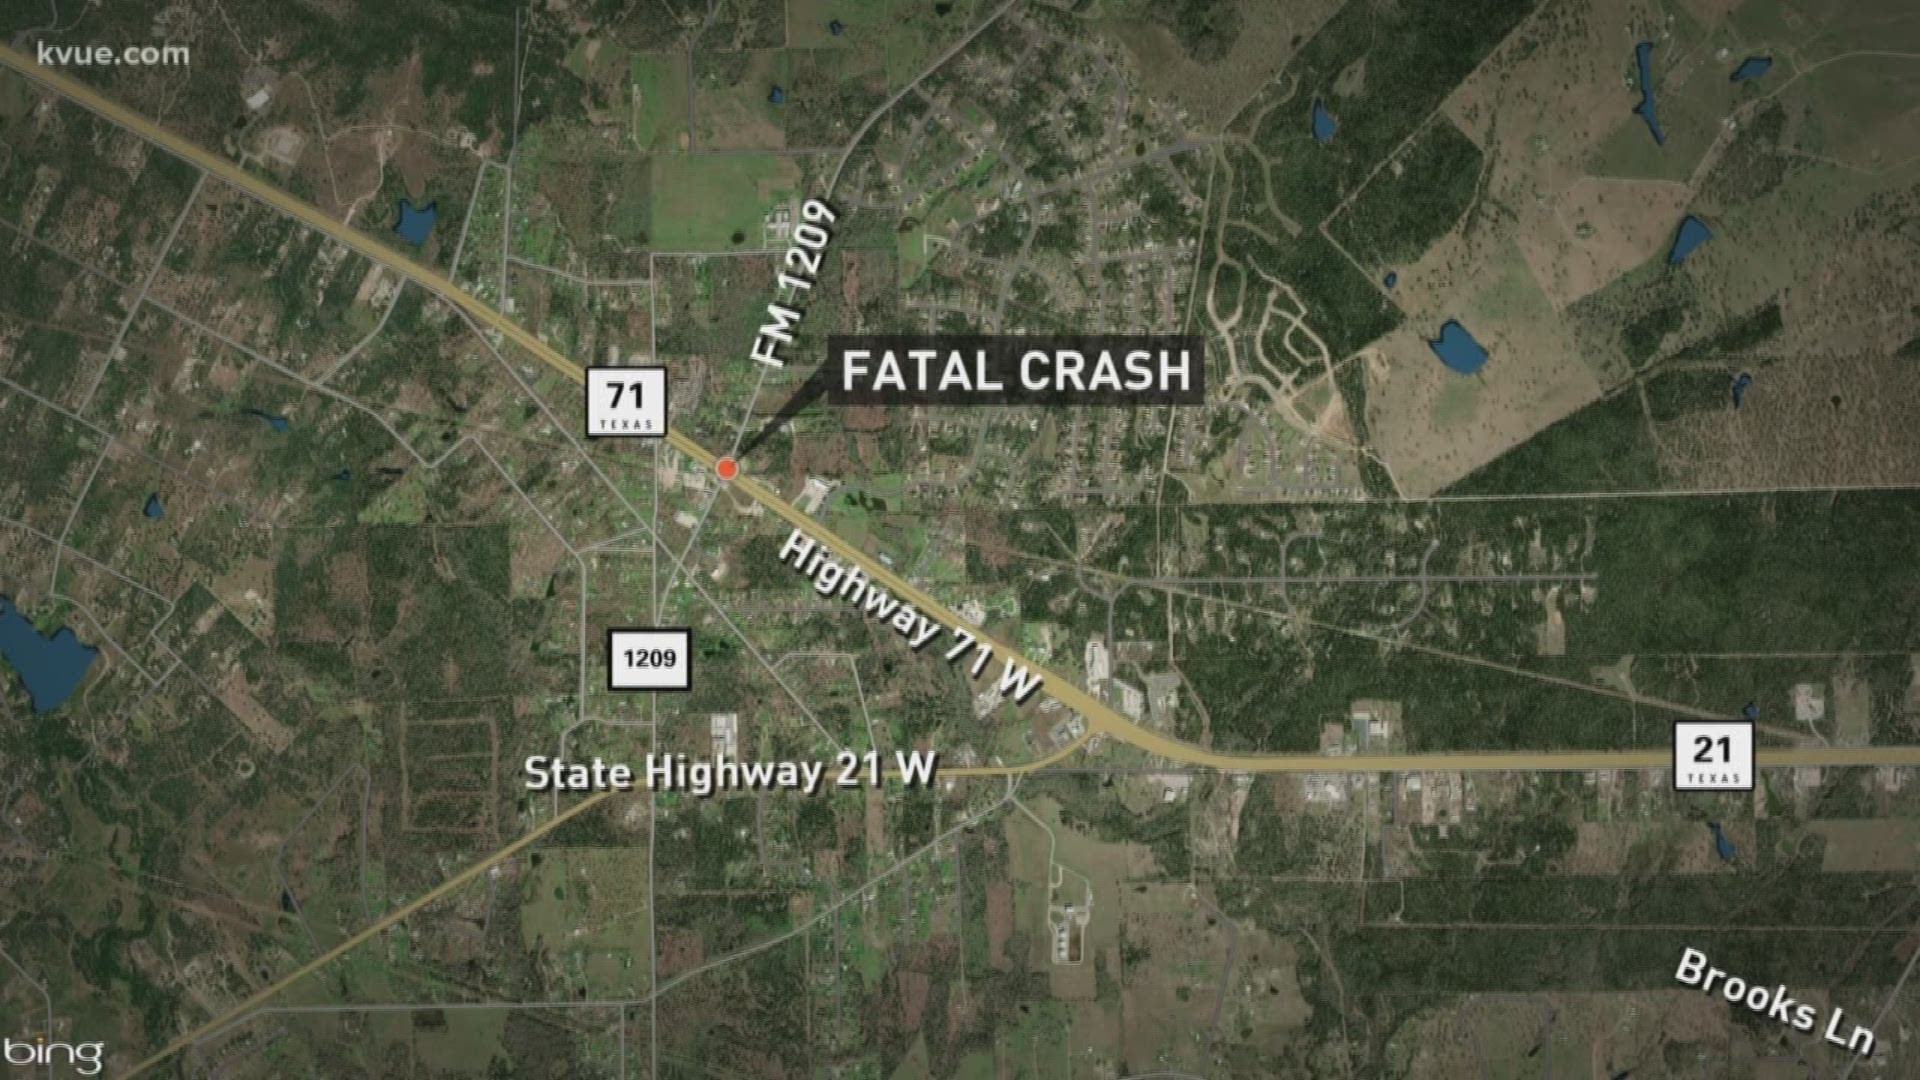 One person killed in crash on Texas Highway 71 in Bastrop County